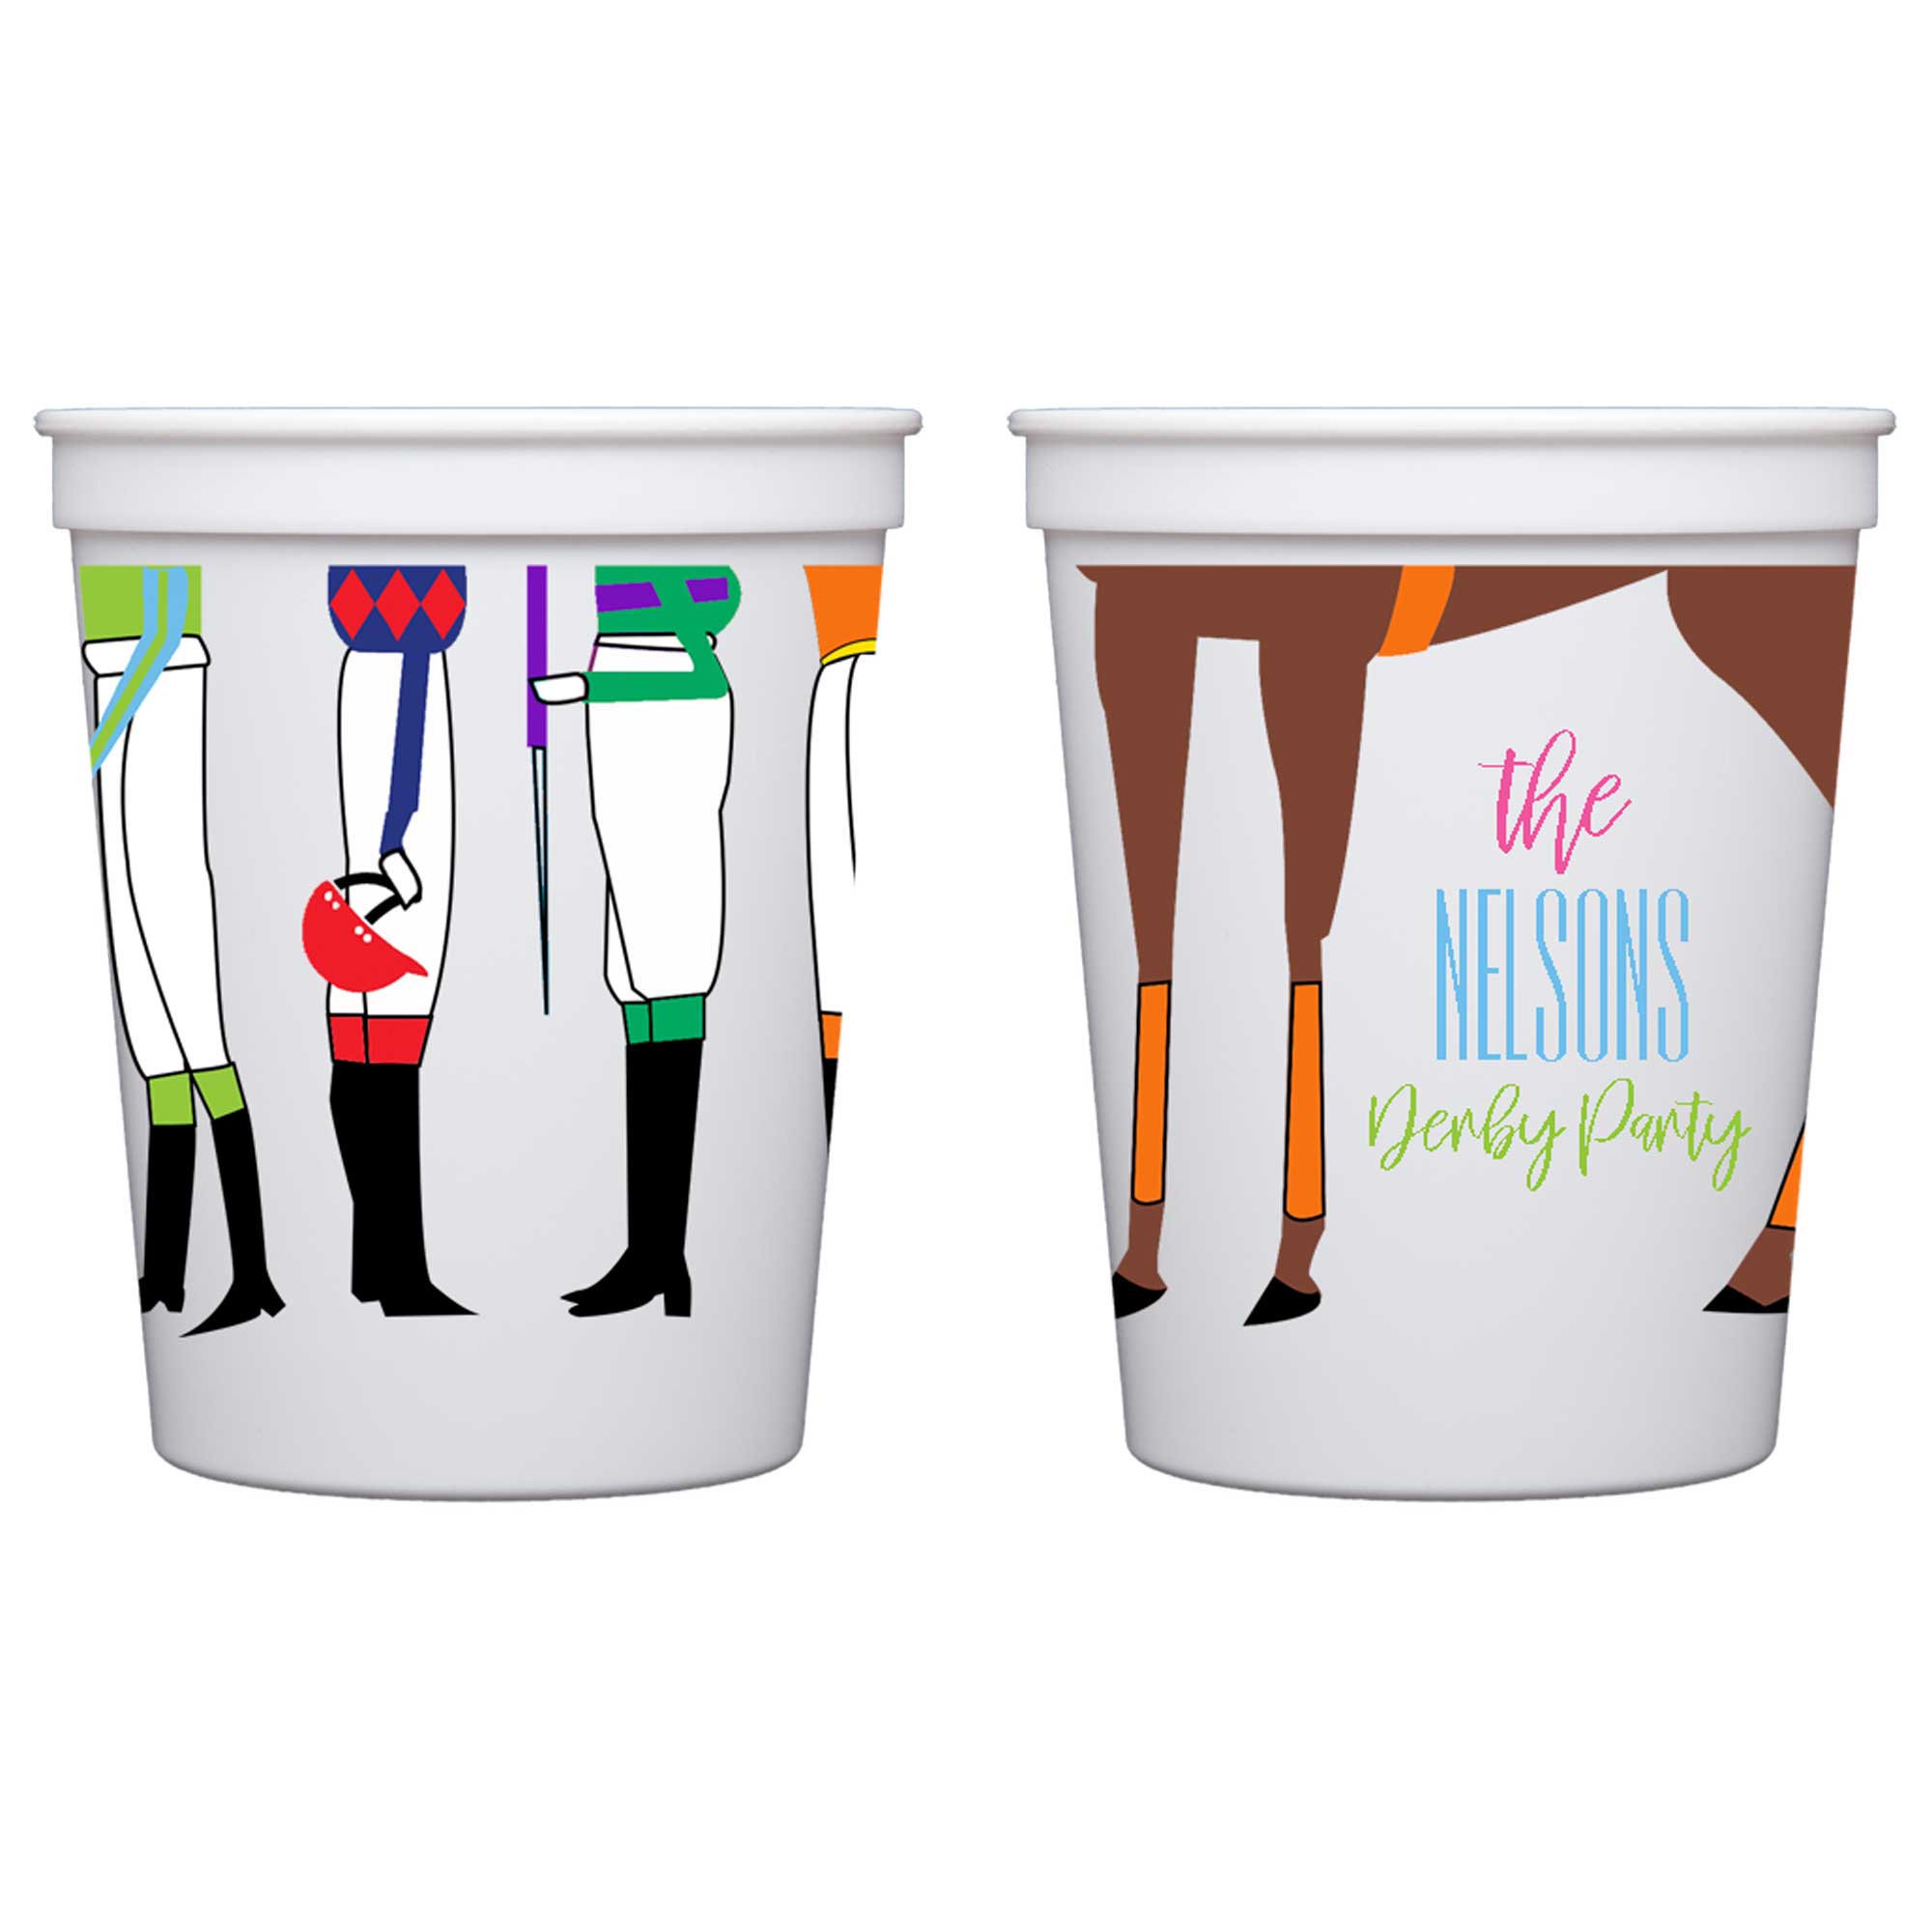 What Size Cup to Order – Two Funny Girls